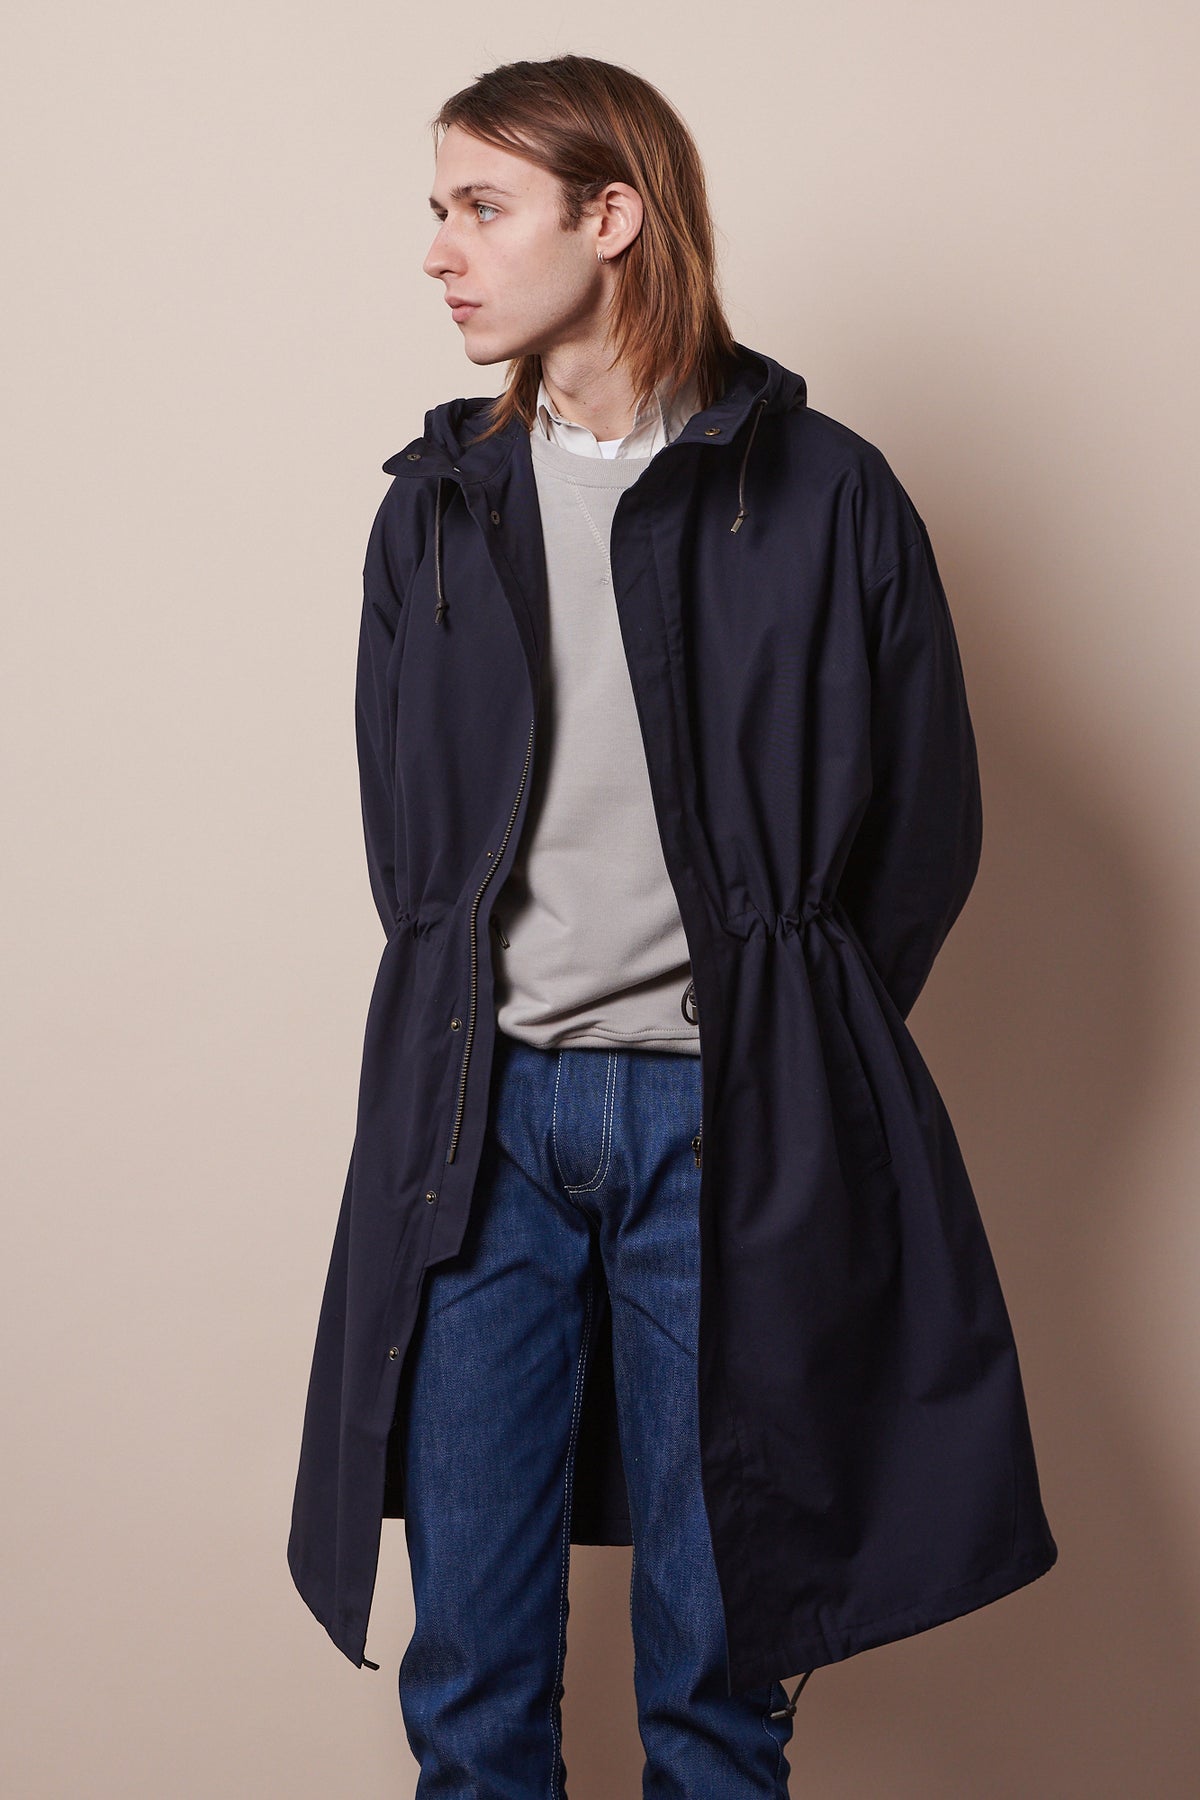 
            Knee up image of male looking to the side wearing parka in navy unzipped, layered over stone raglan sweatshirt and blue jeans